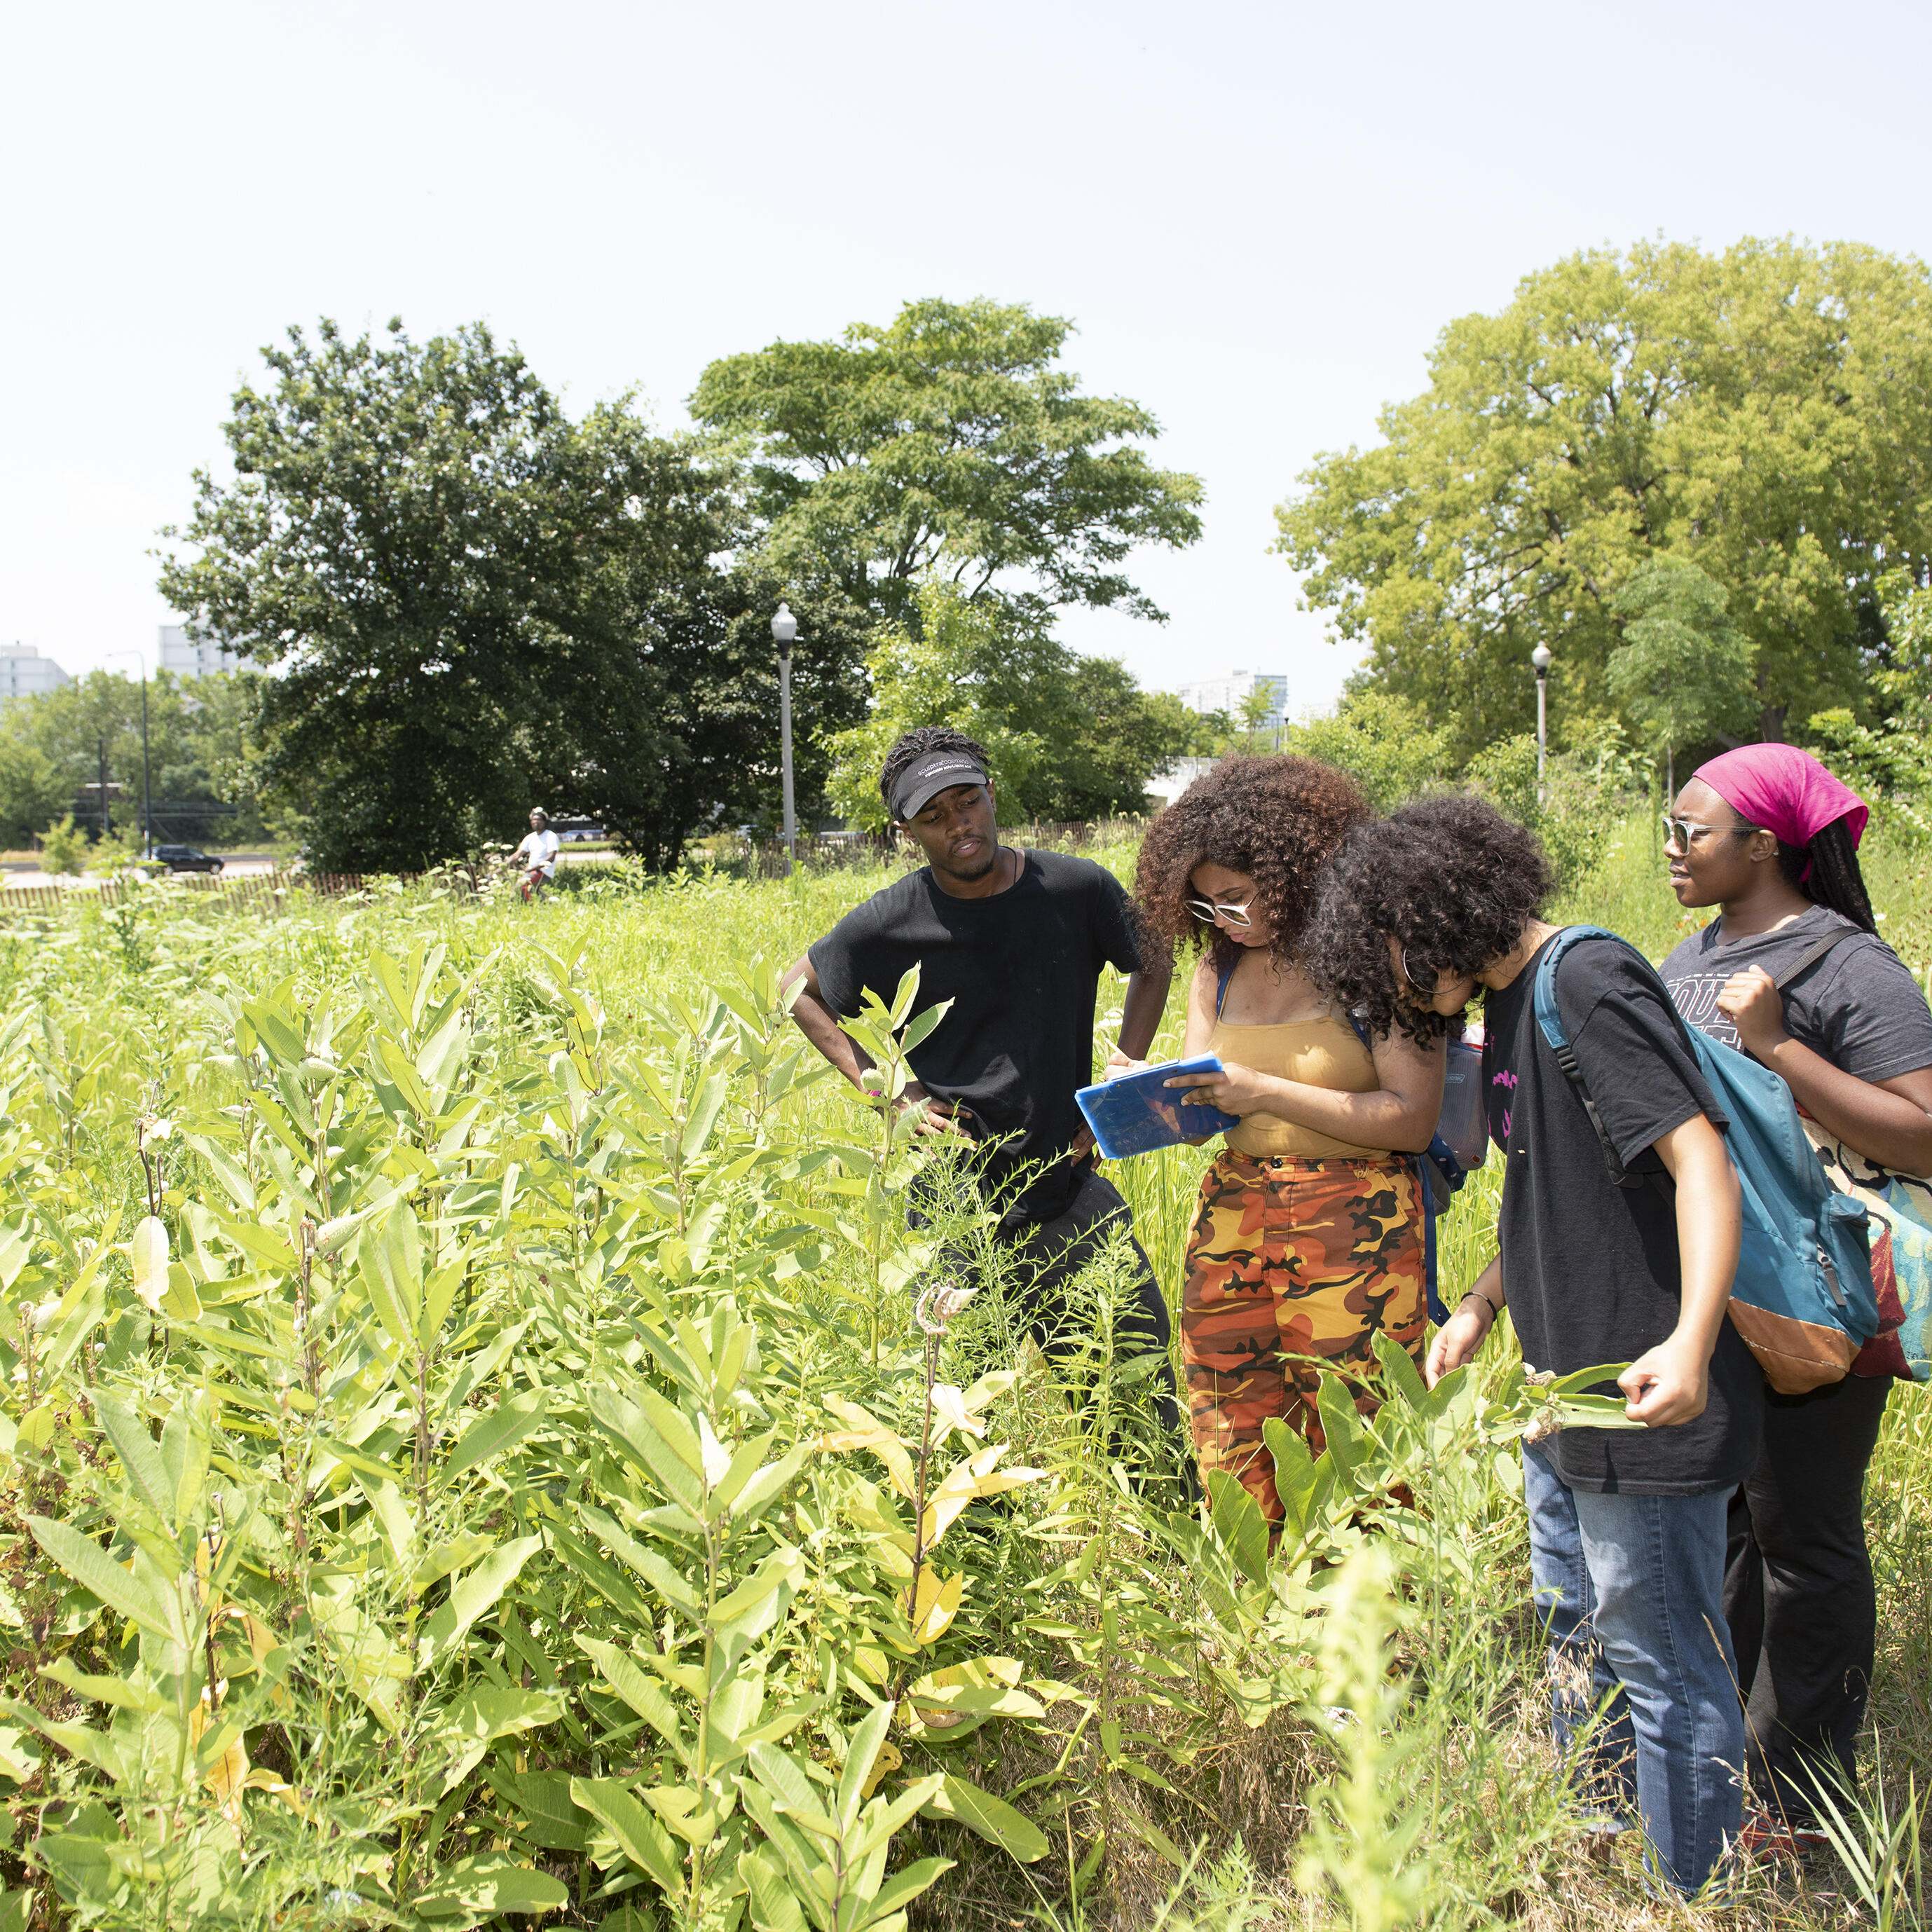 The Volunteer Stewardship Network (VSN) is a statewide program of TNC's Illinois chapter that supports, promotes and expands the role of communities working to protect nature.